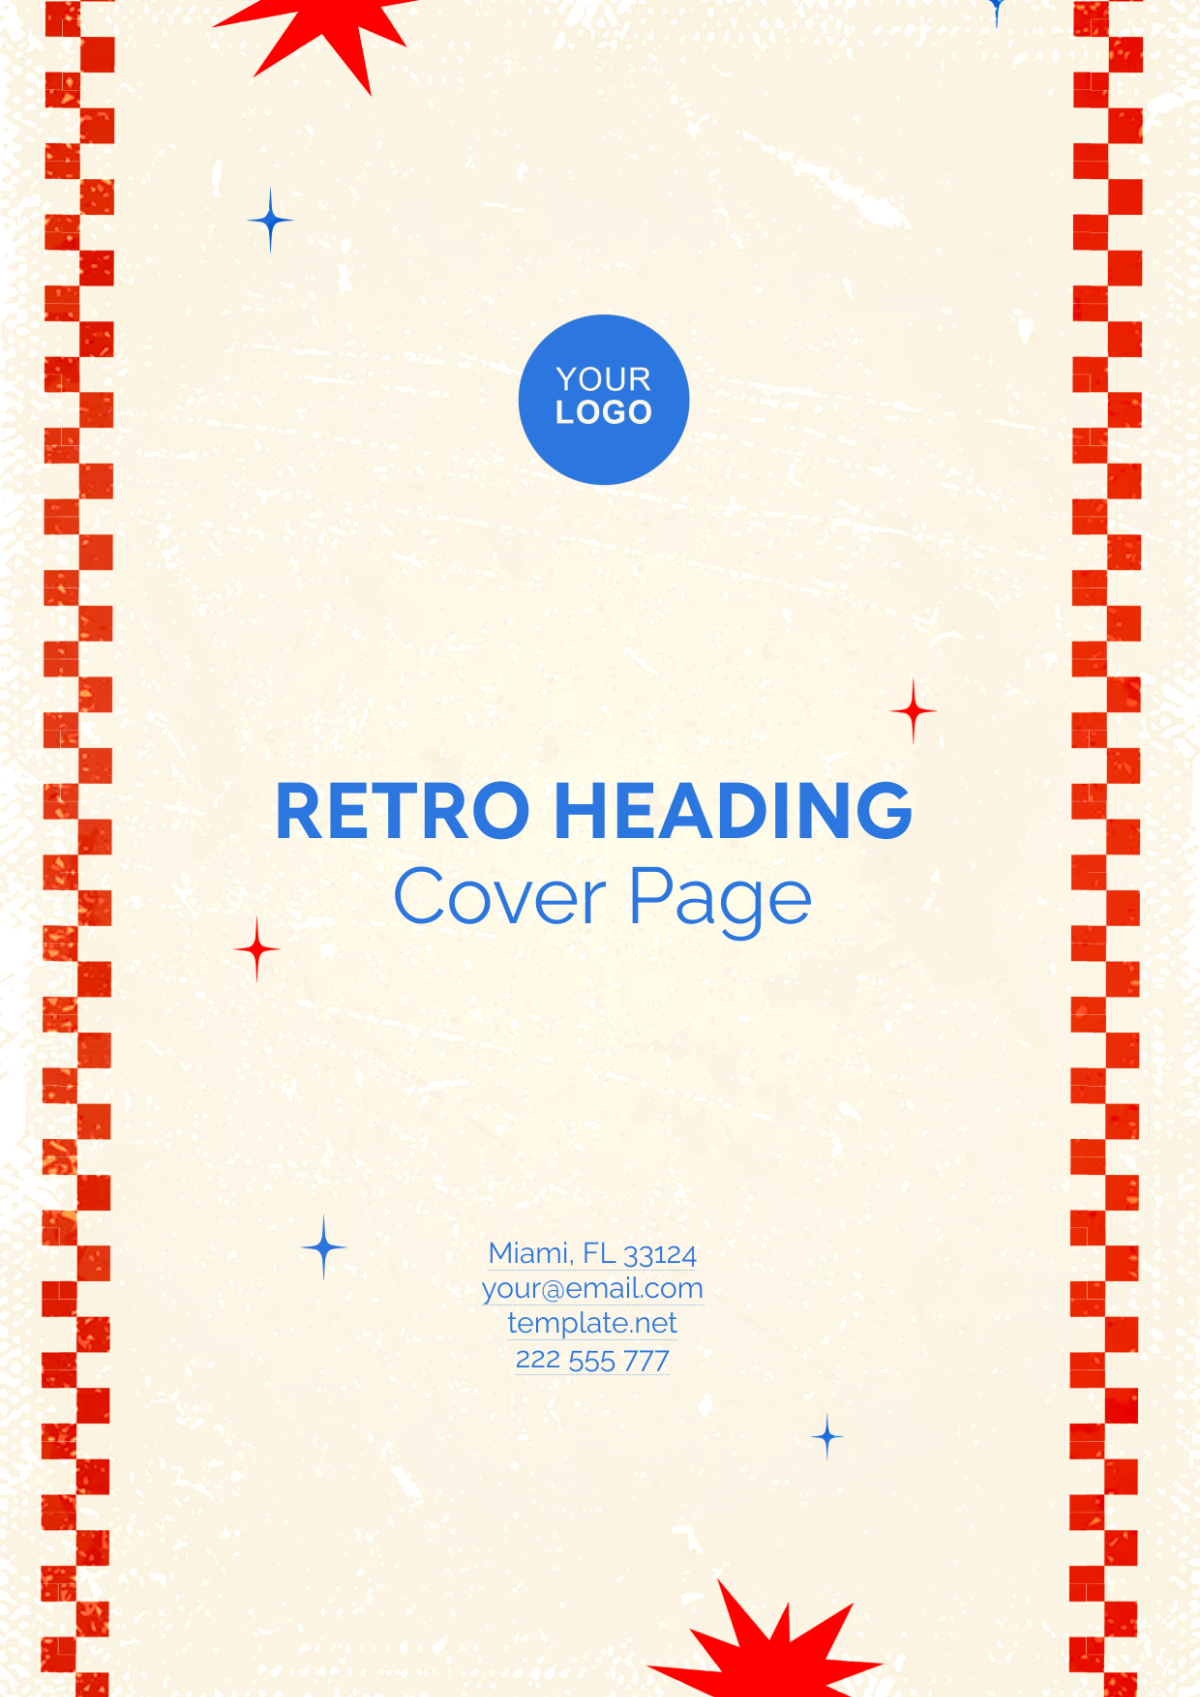 Retro Heading Cover Page Template